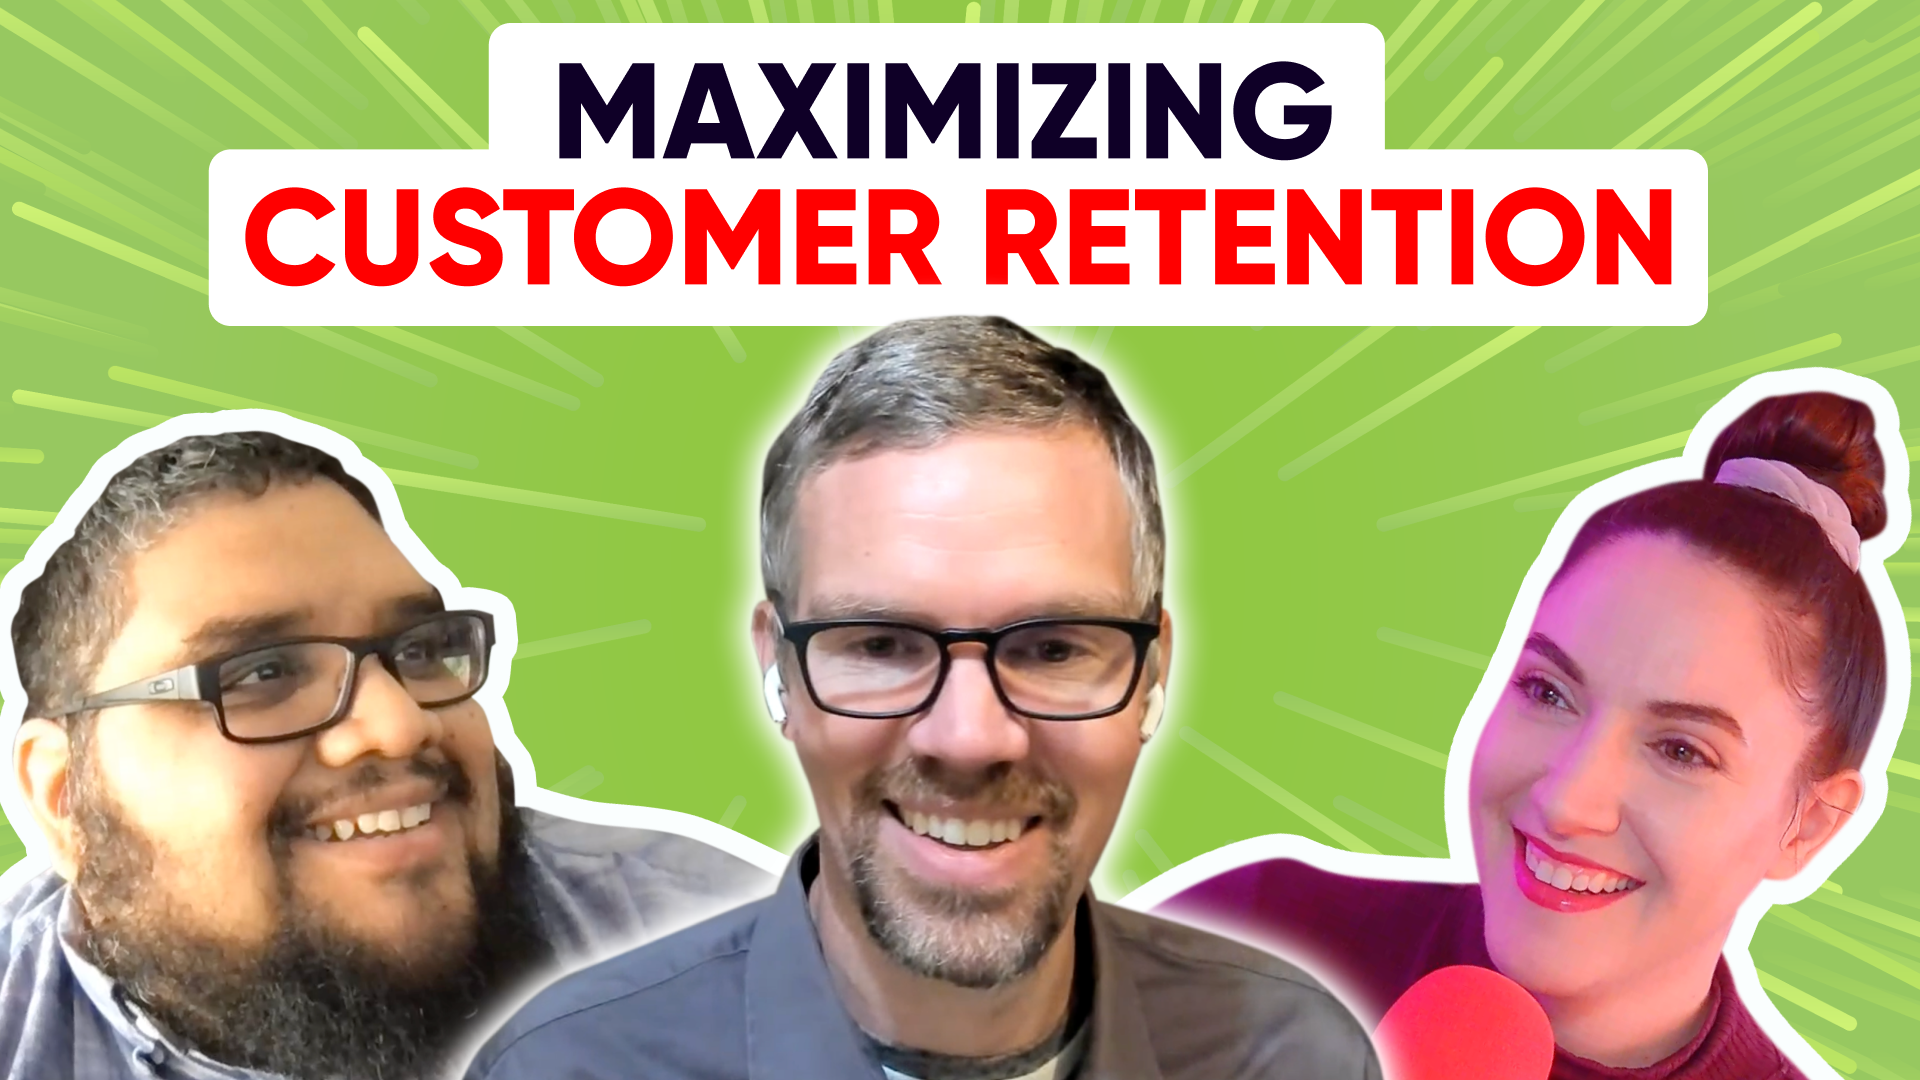 Maximizing Customer Retention in an AI-Driven World with Jeff Beaumont, Customer Success Consultant